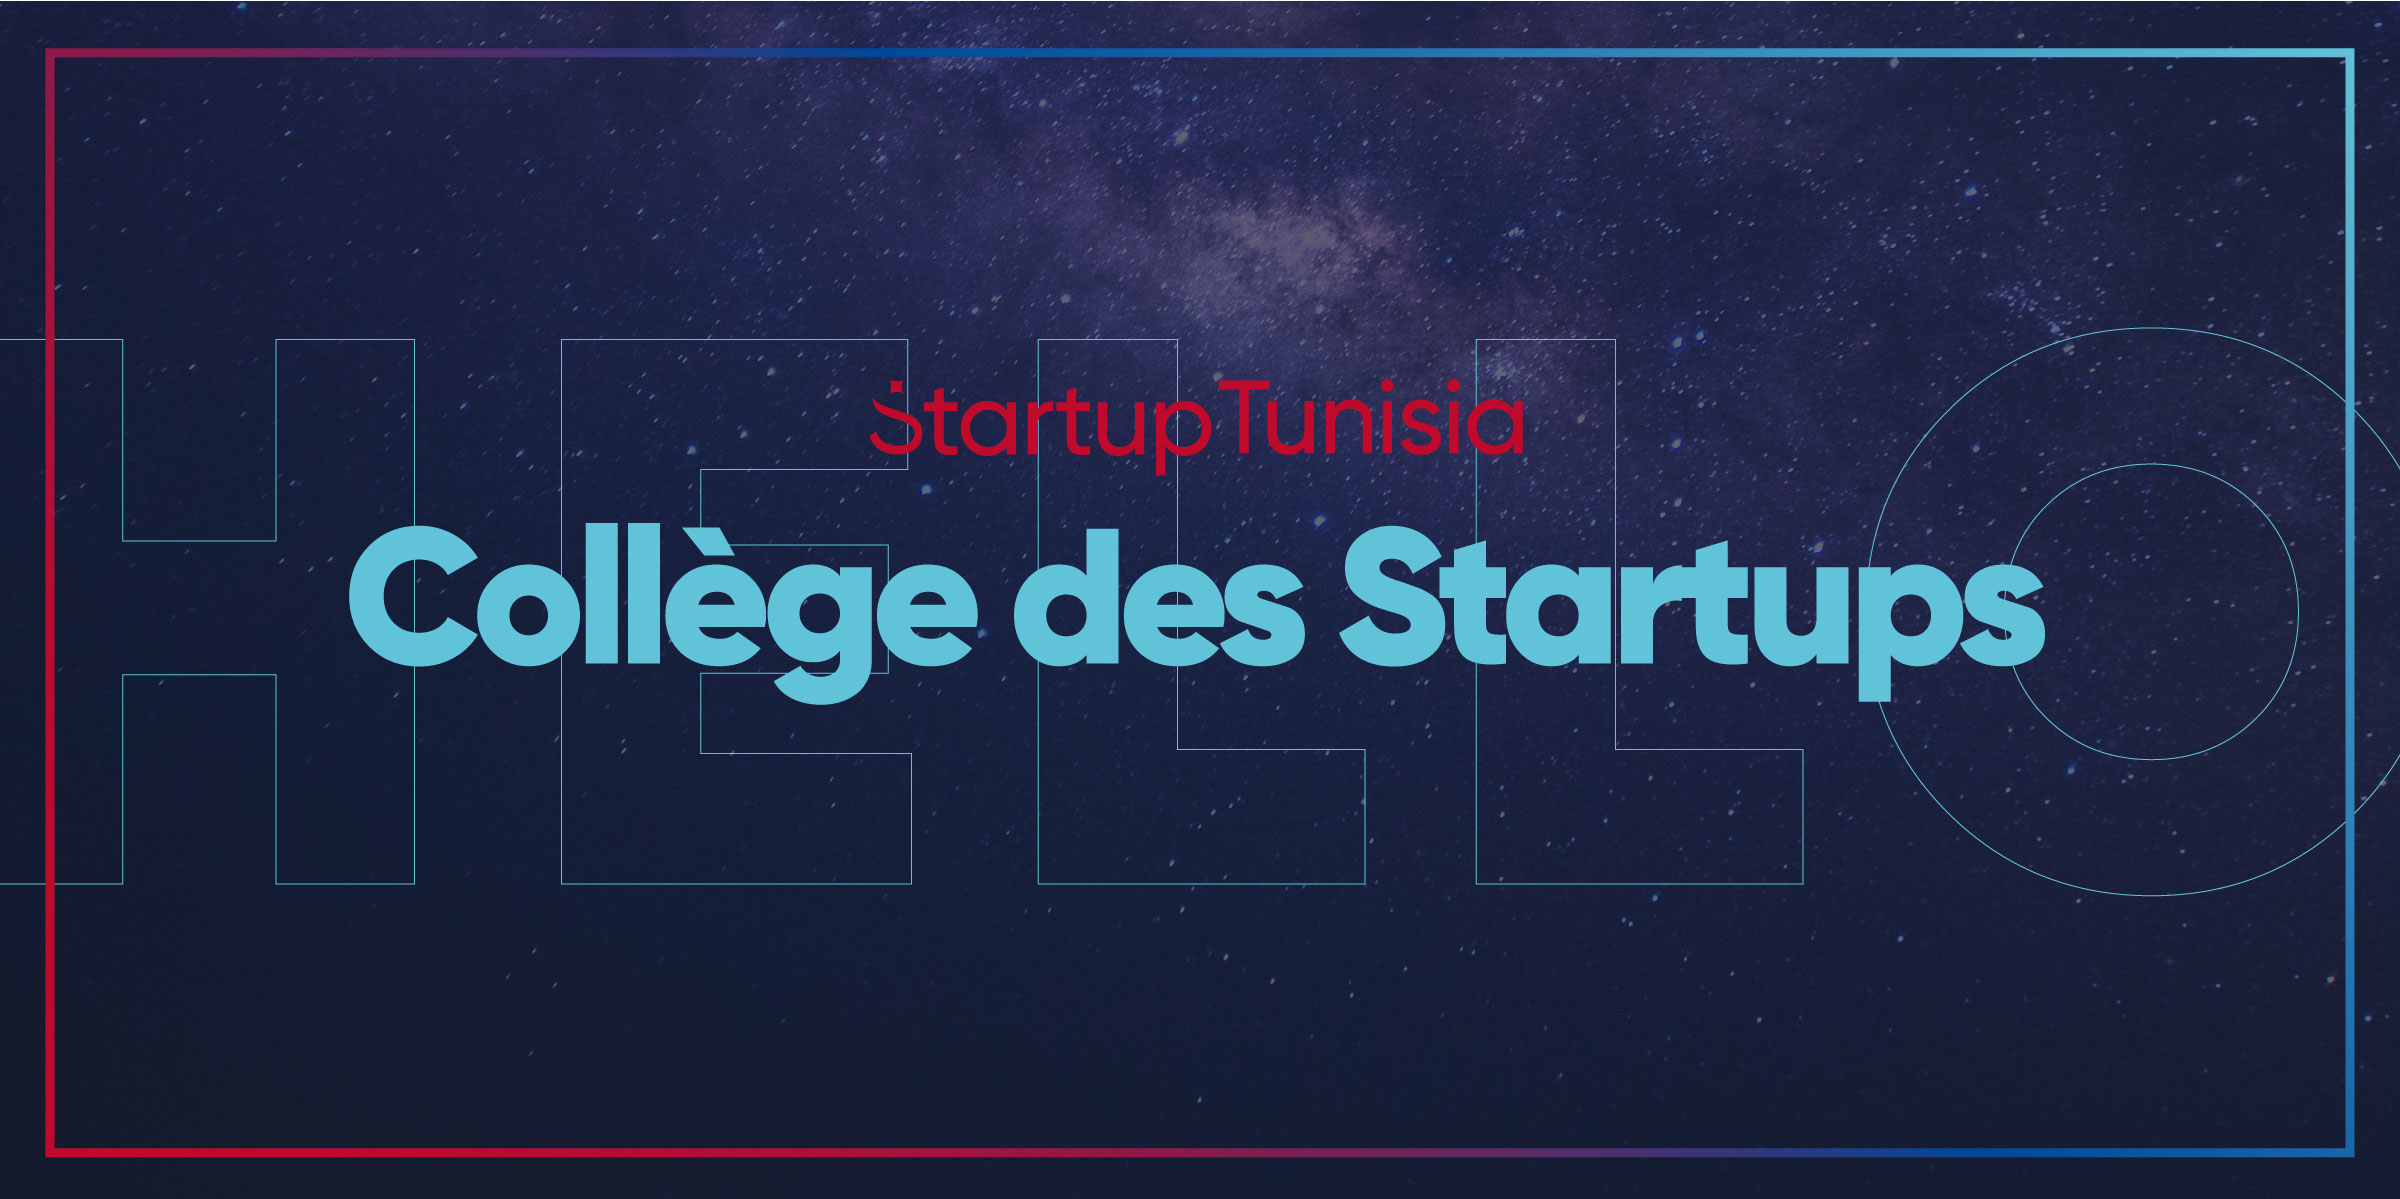 The new College of Startups takes over to ensure the continuity of the Startup Tunisia program